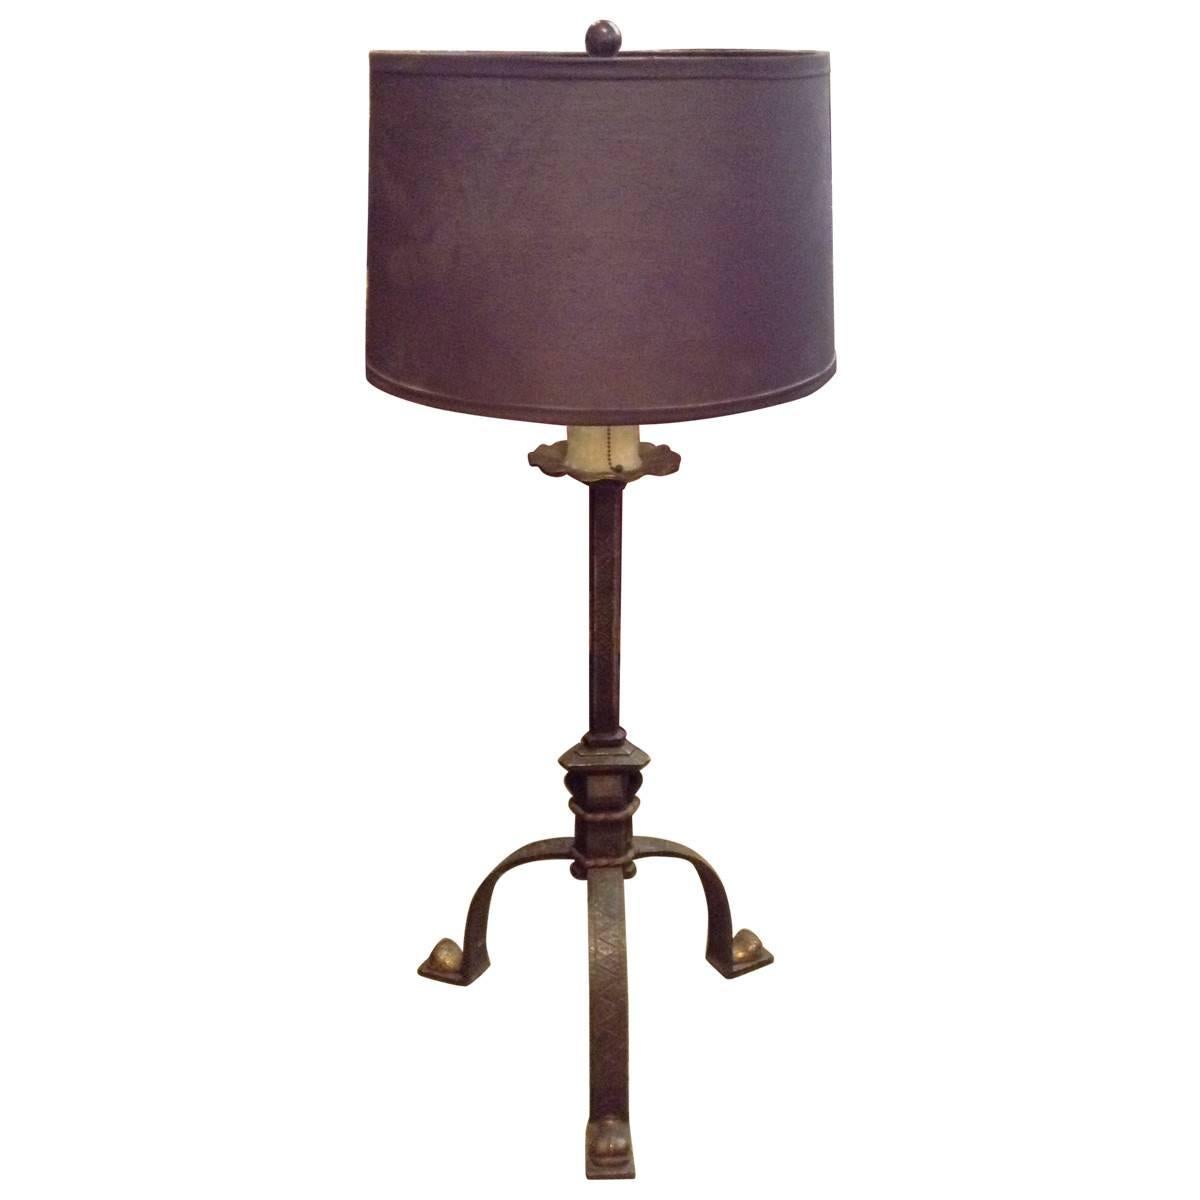 Wrought Iron Candlestick Floor Lamp For Sale